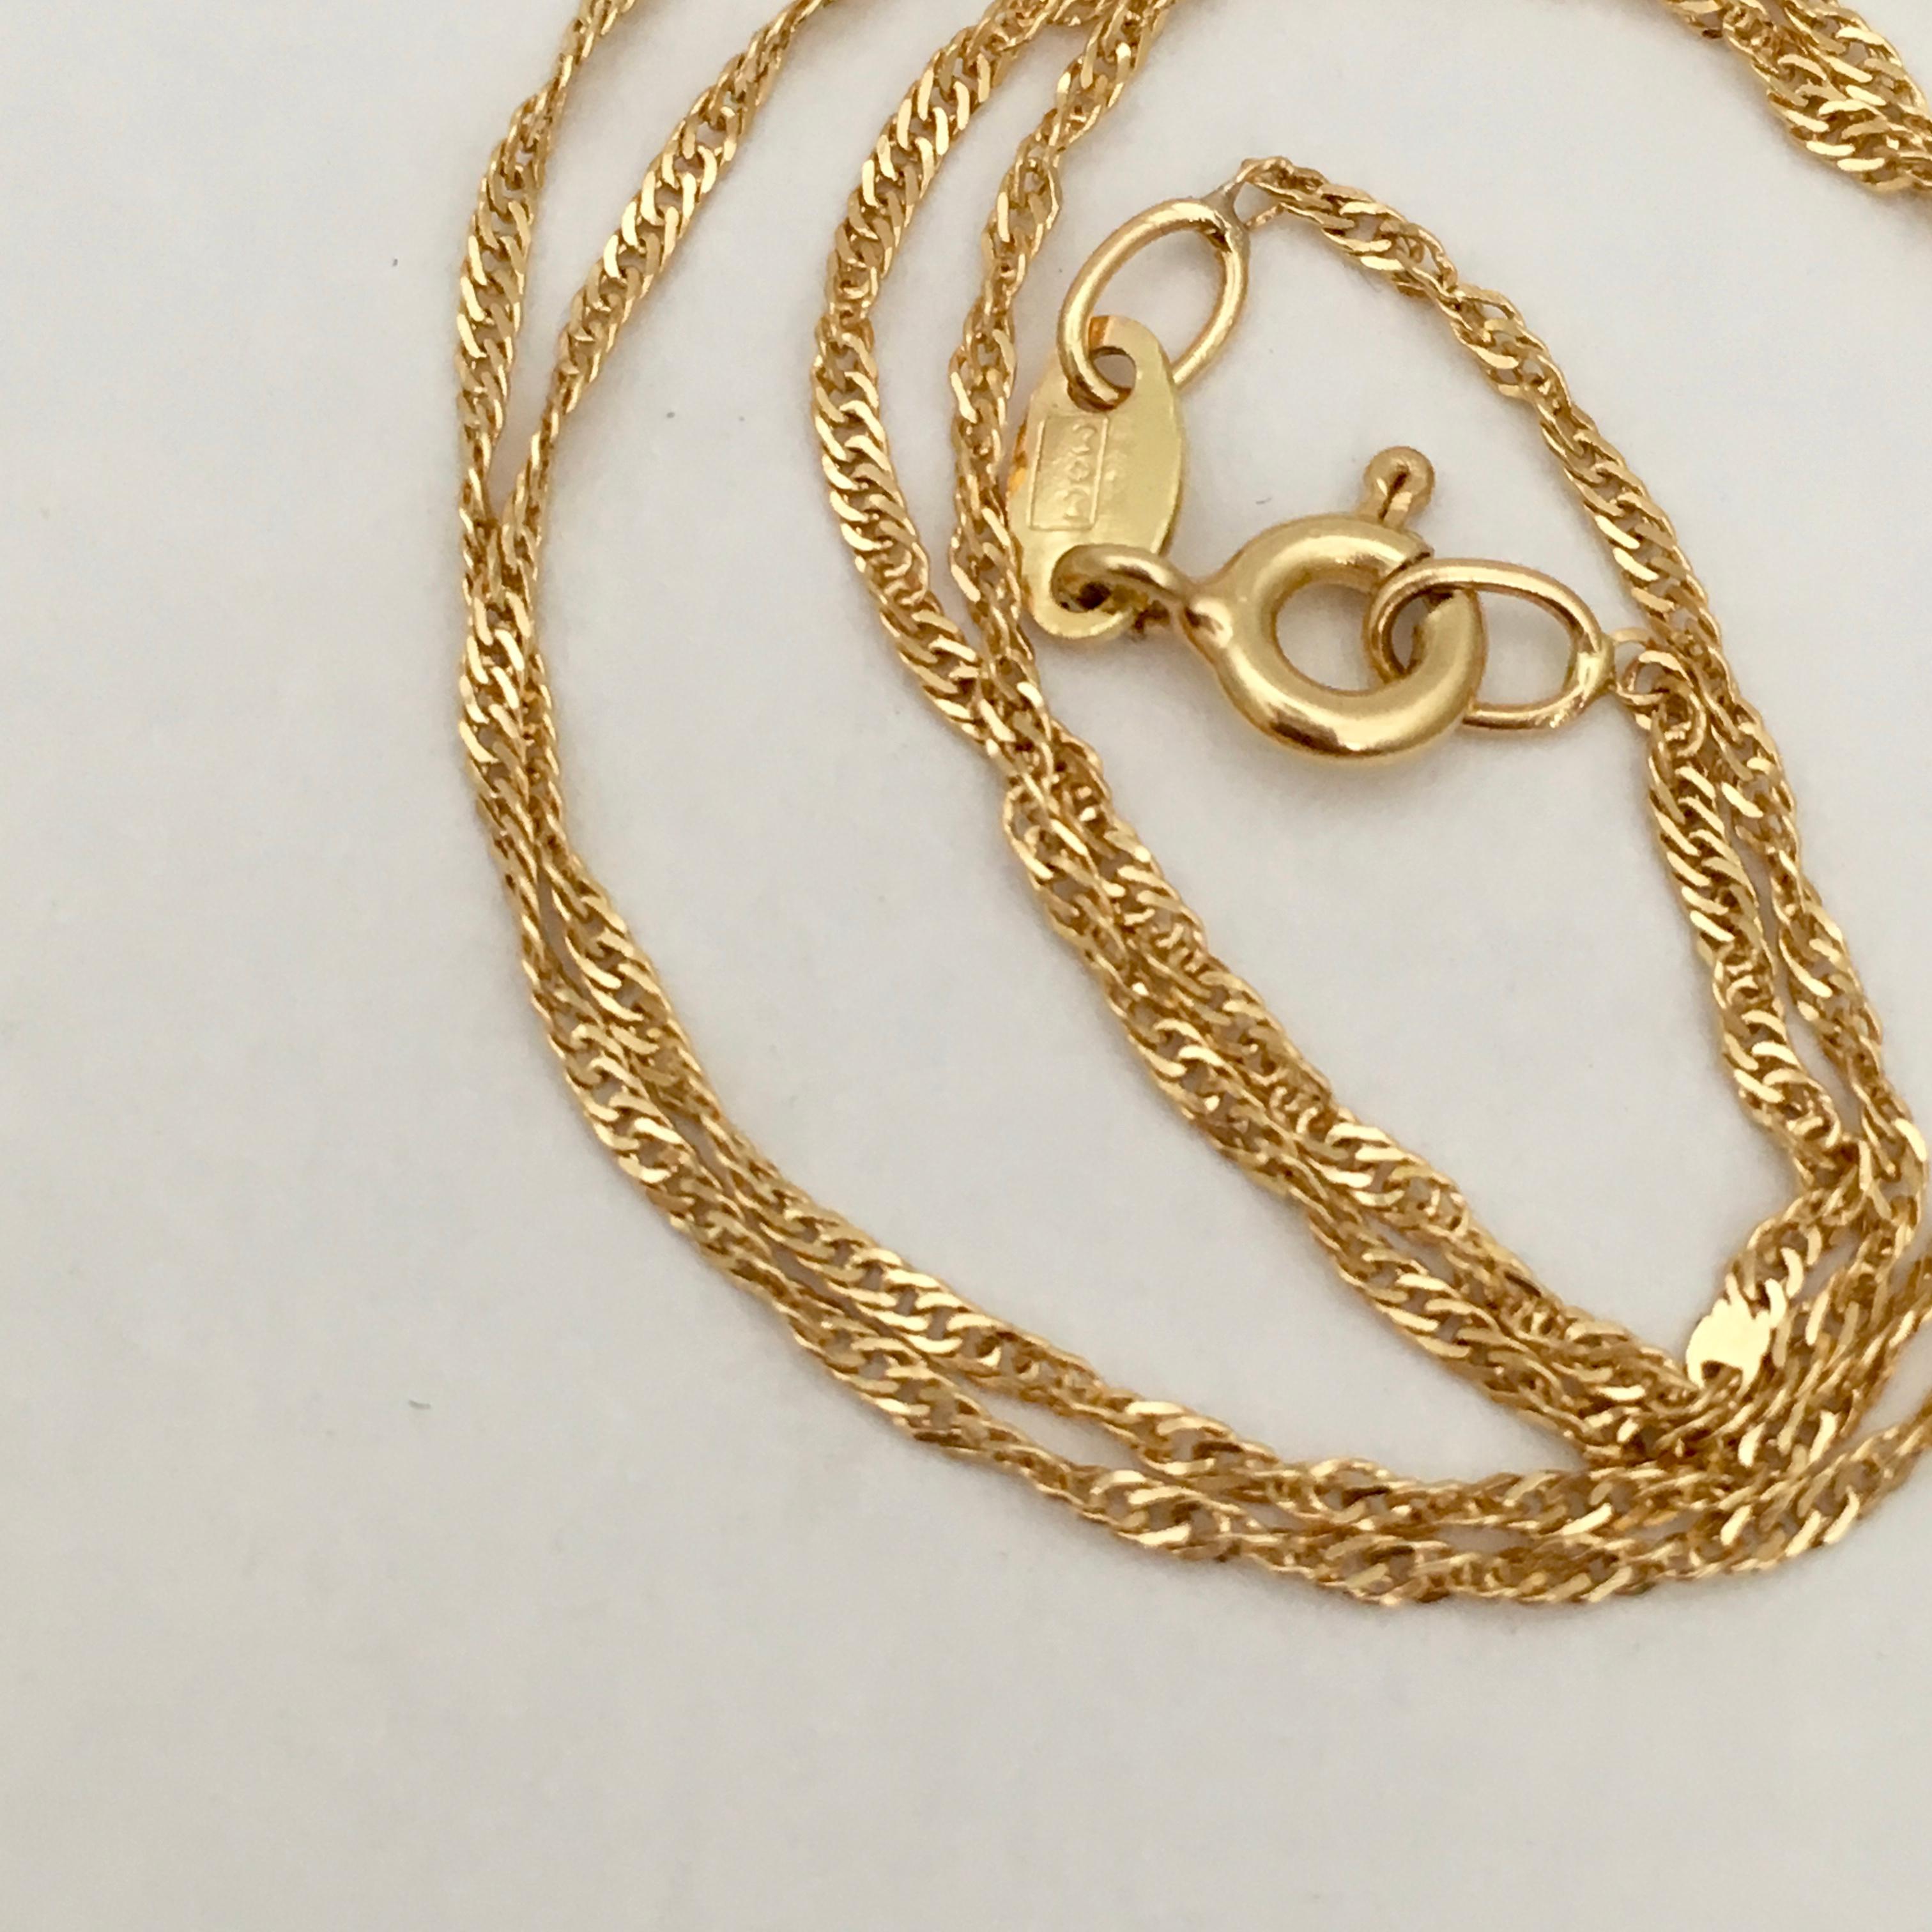 Vintage 18 Karat Gold Chain Bright Yellow Gold Fine Twisted Necklace 5